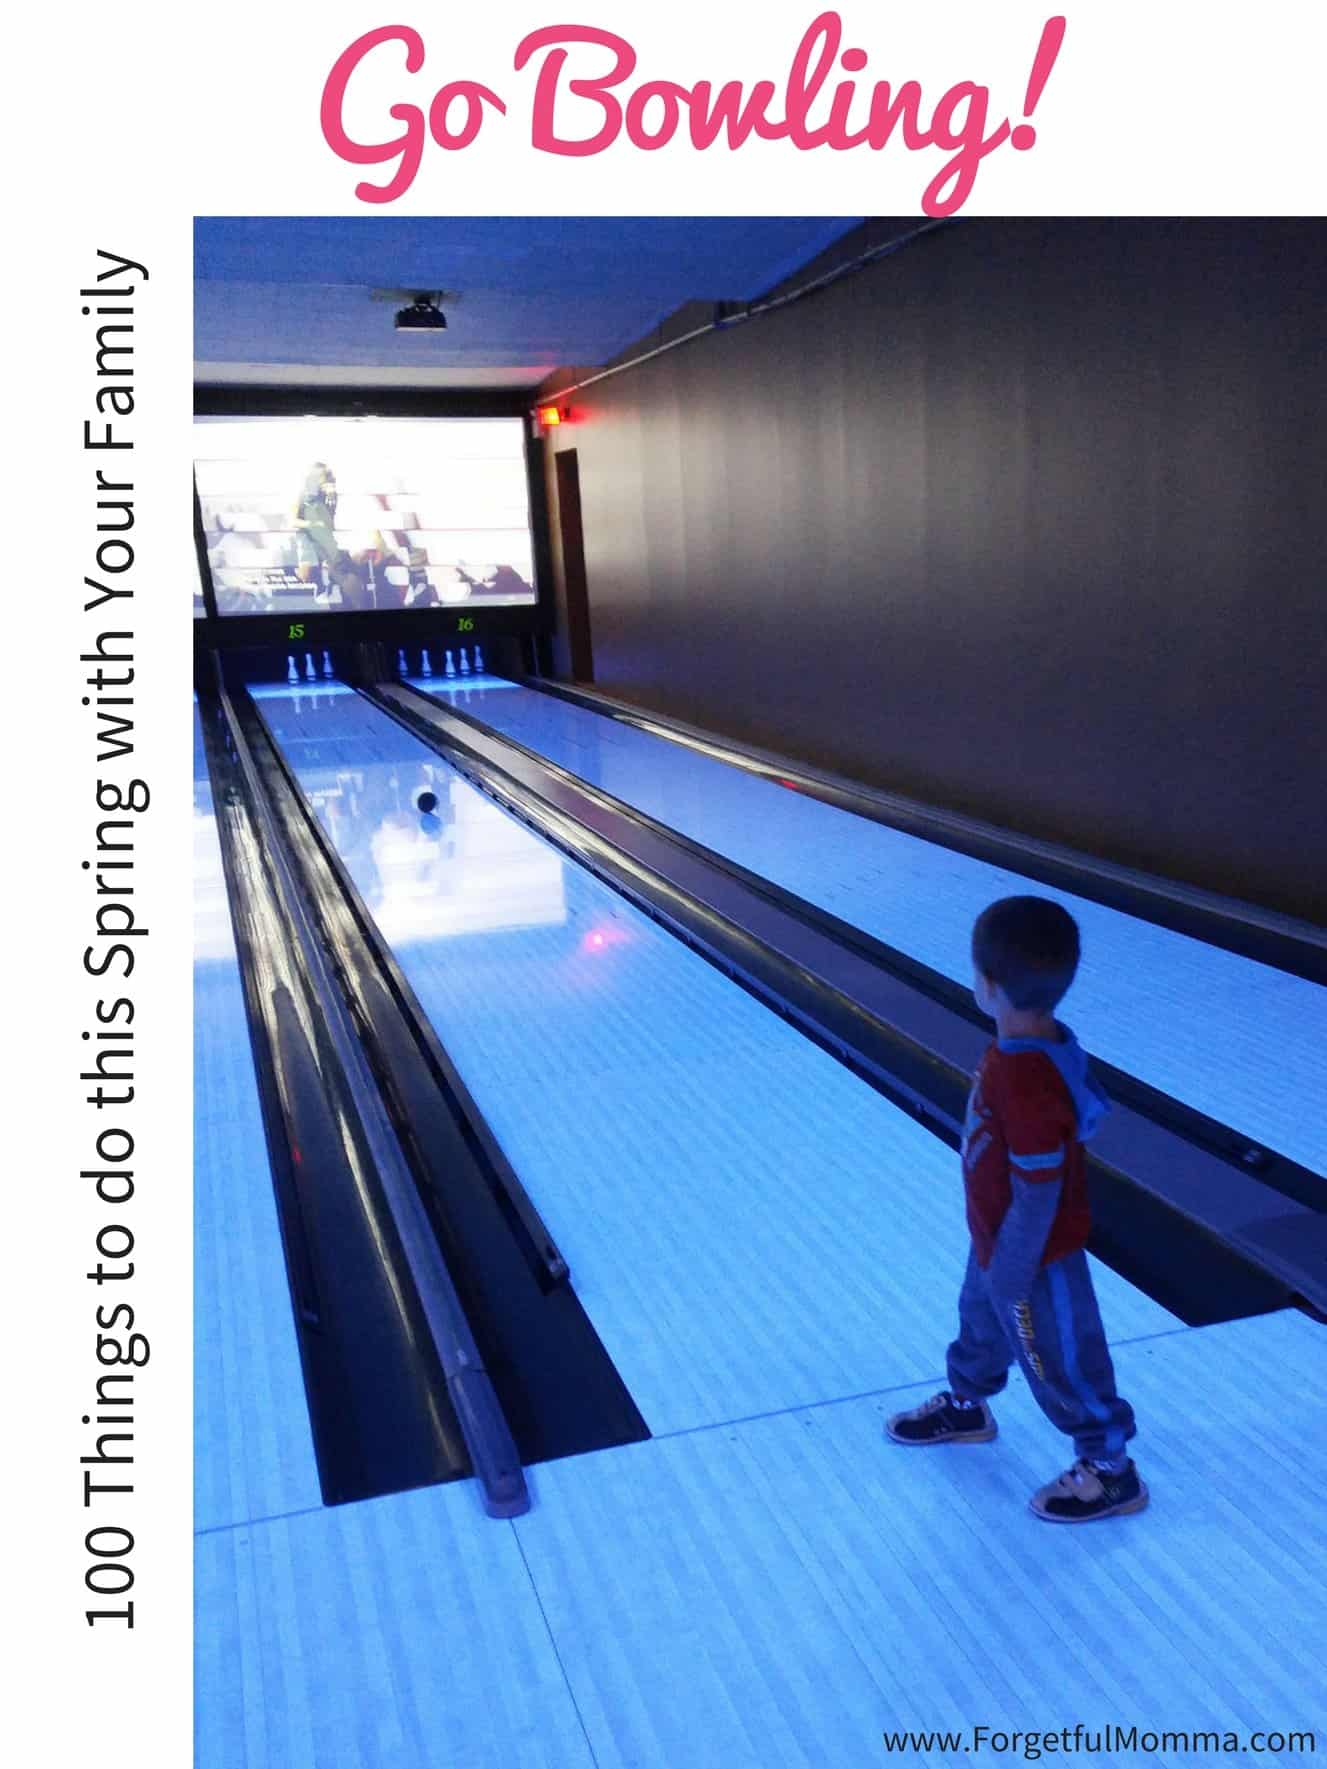 100 Things to do this Spring with Your Family - go bowling